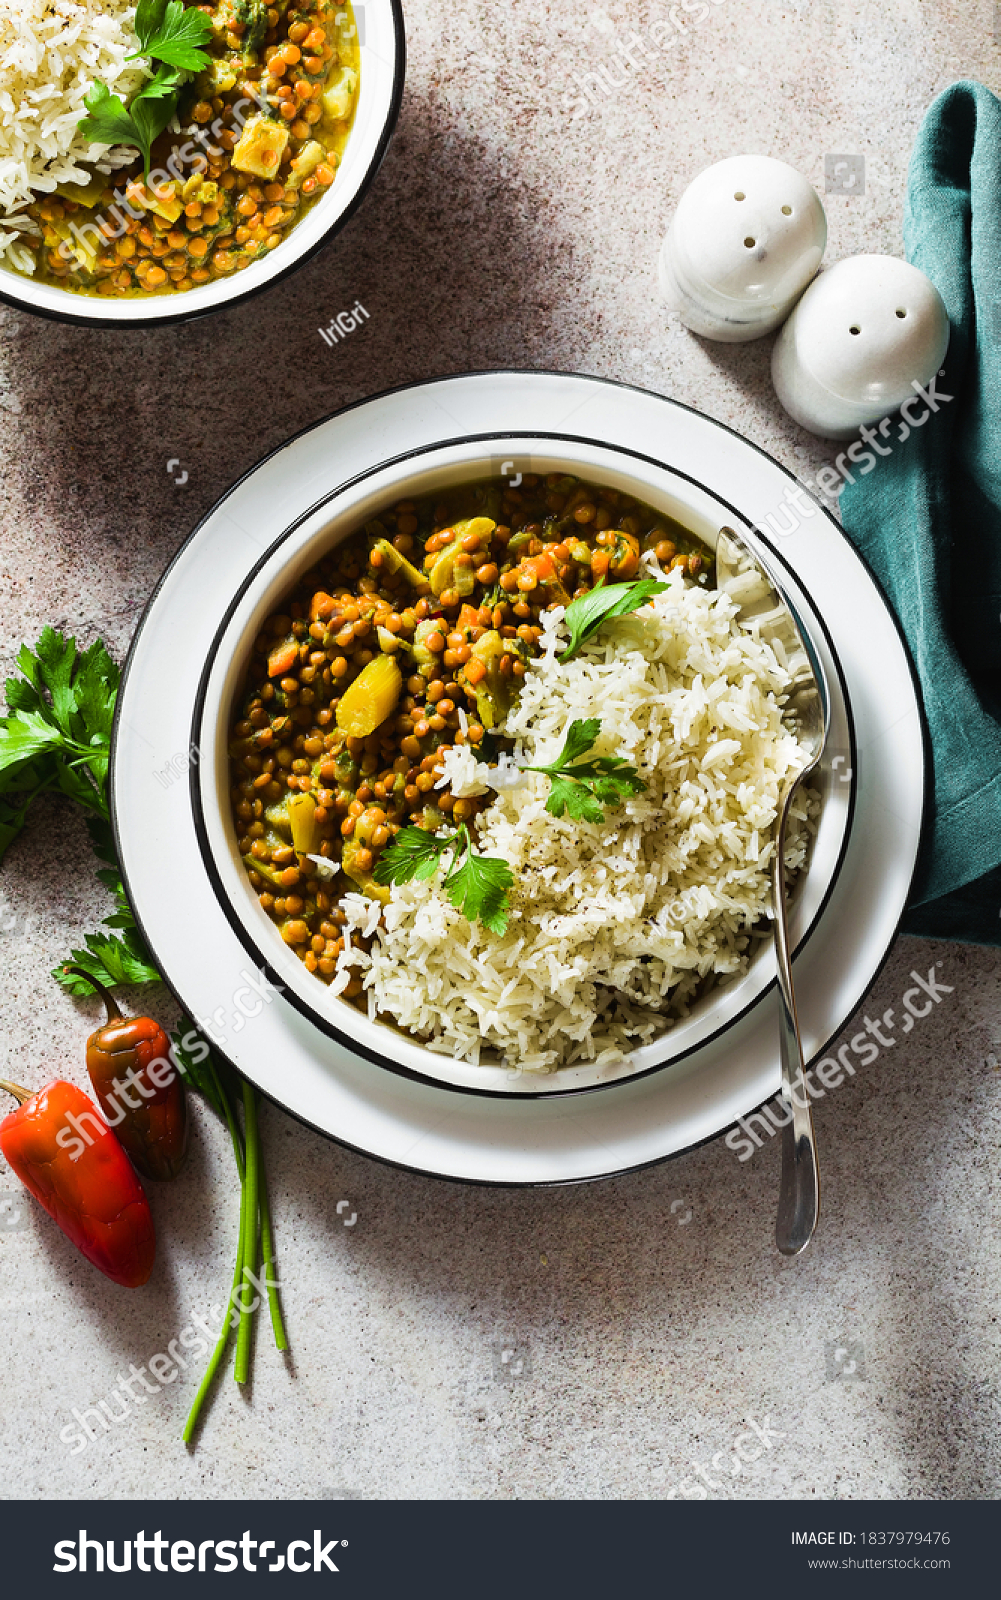 indian lentil dhal with vegetables and basmati rice on the table. healthy vegan Ayurvedic cuisine #1837979476